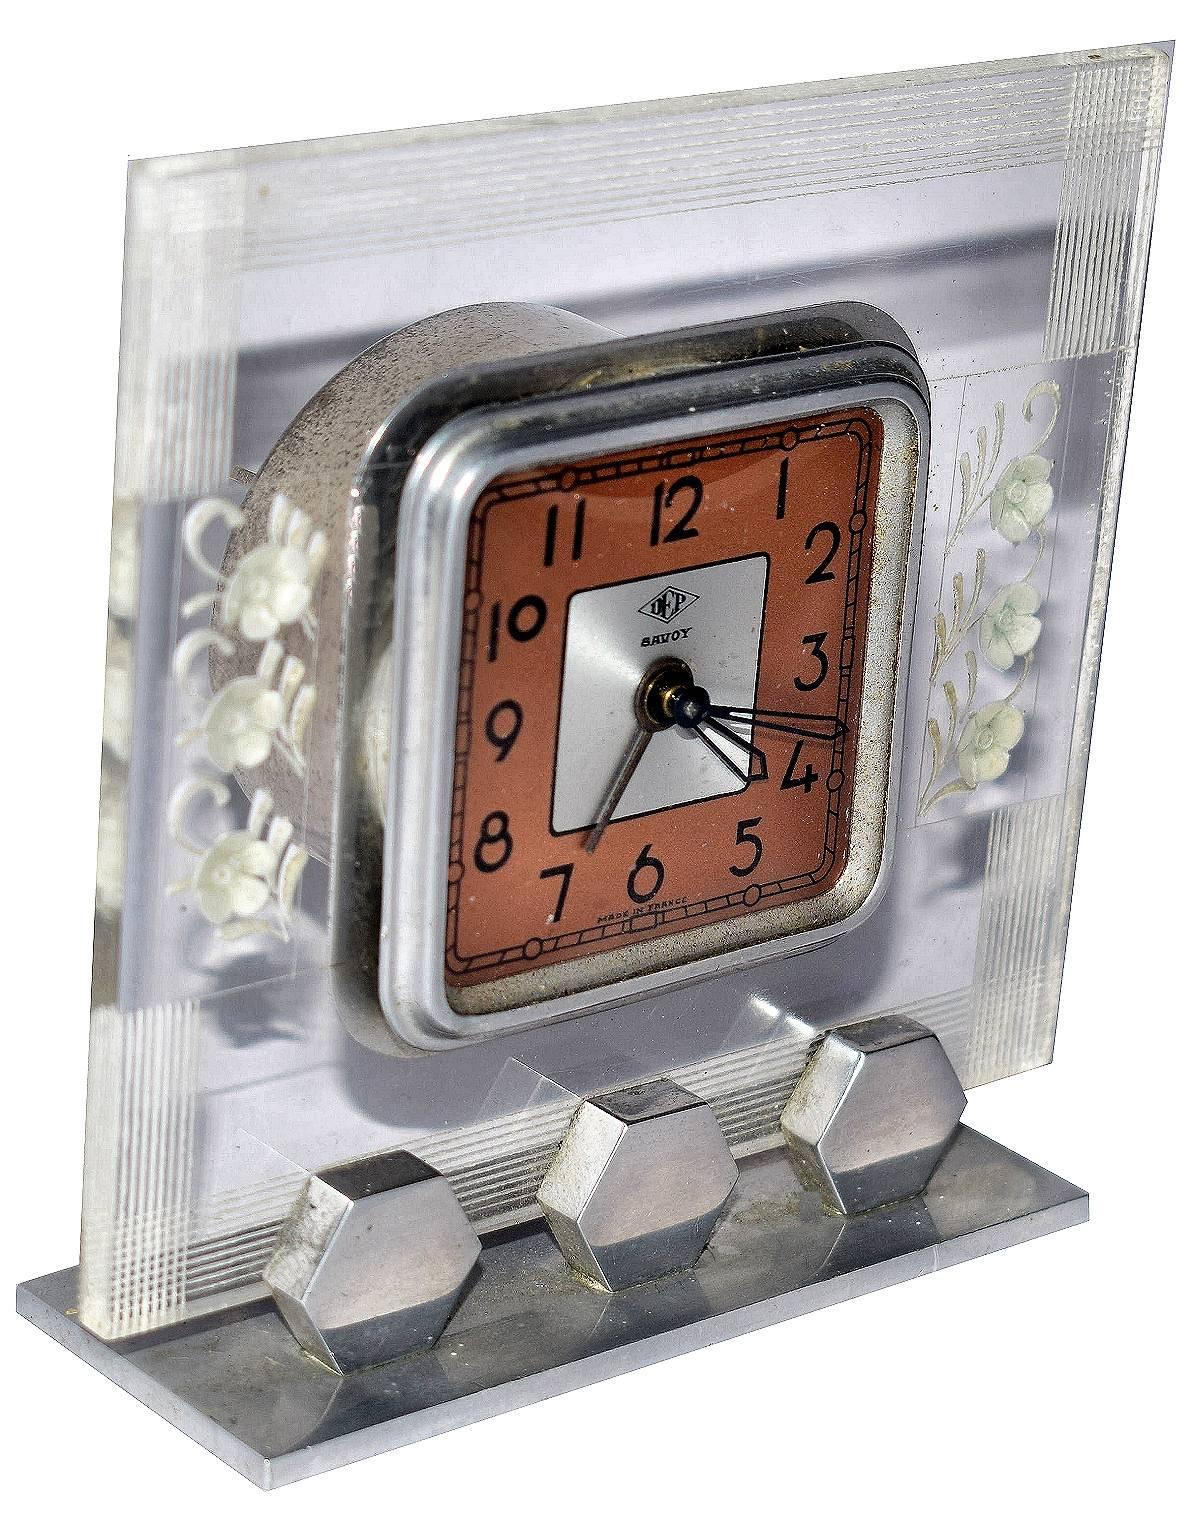 French Art Deco Acrylic clock by the French clock makers DEP this model is called SAVOY.
The case is transparent early plastic with etched decoration each side The is dial two-tone in silver and salmon pink with a glass domed cover. The clock has